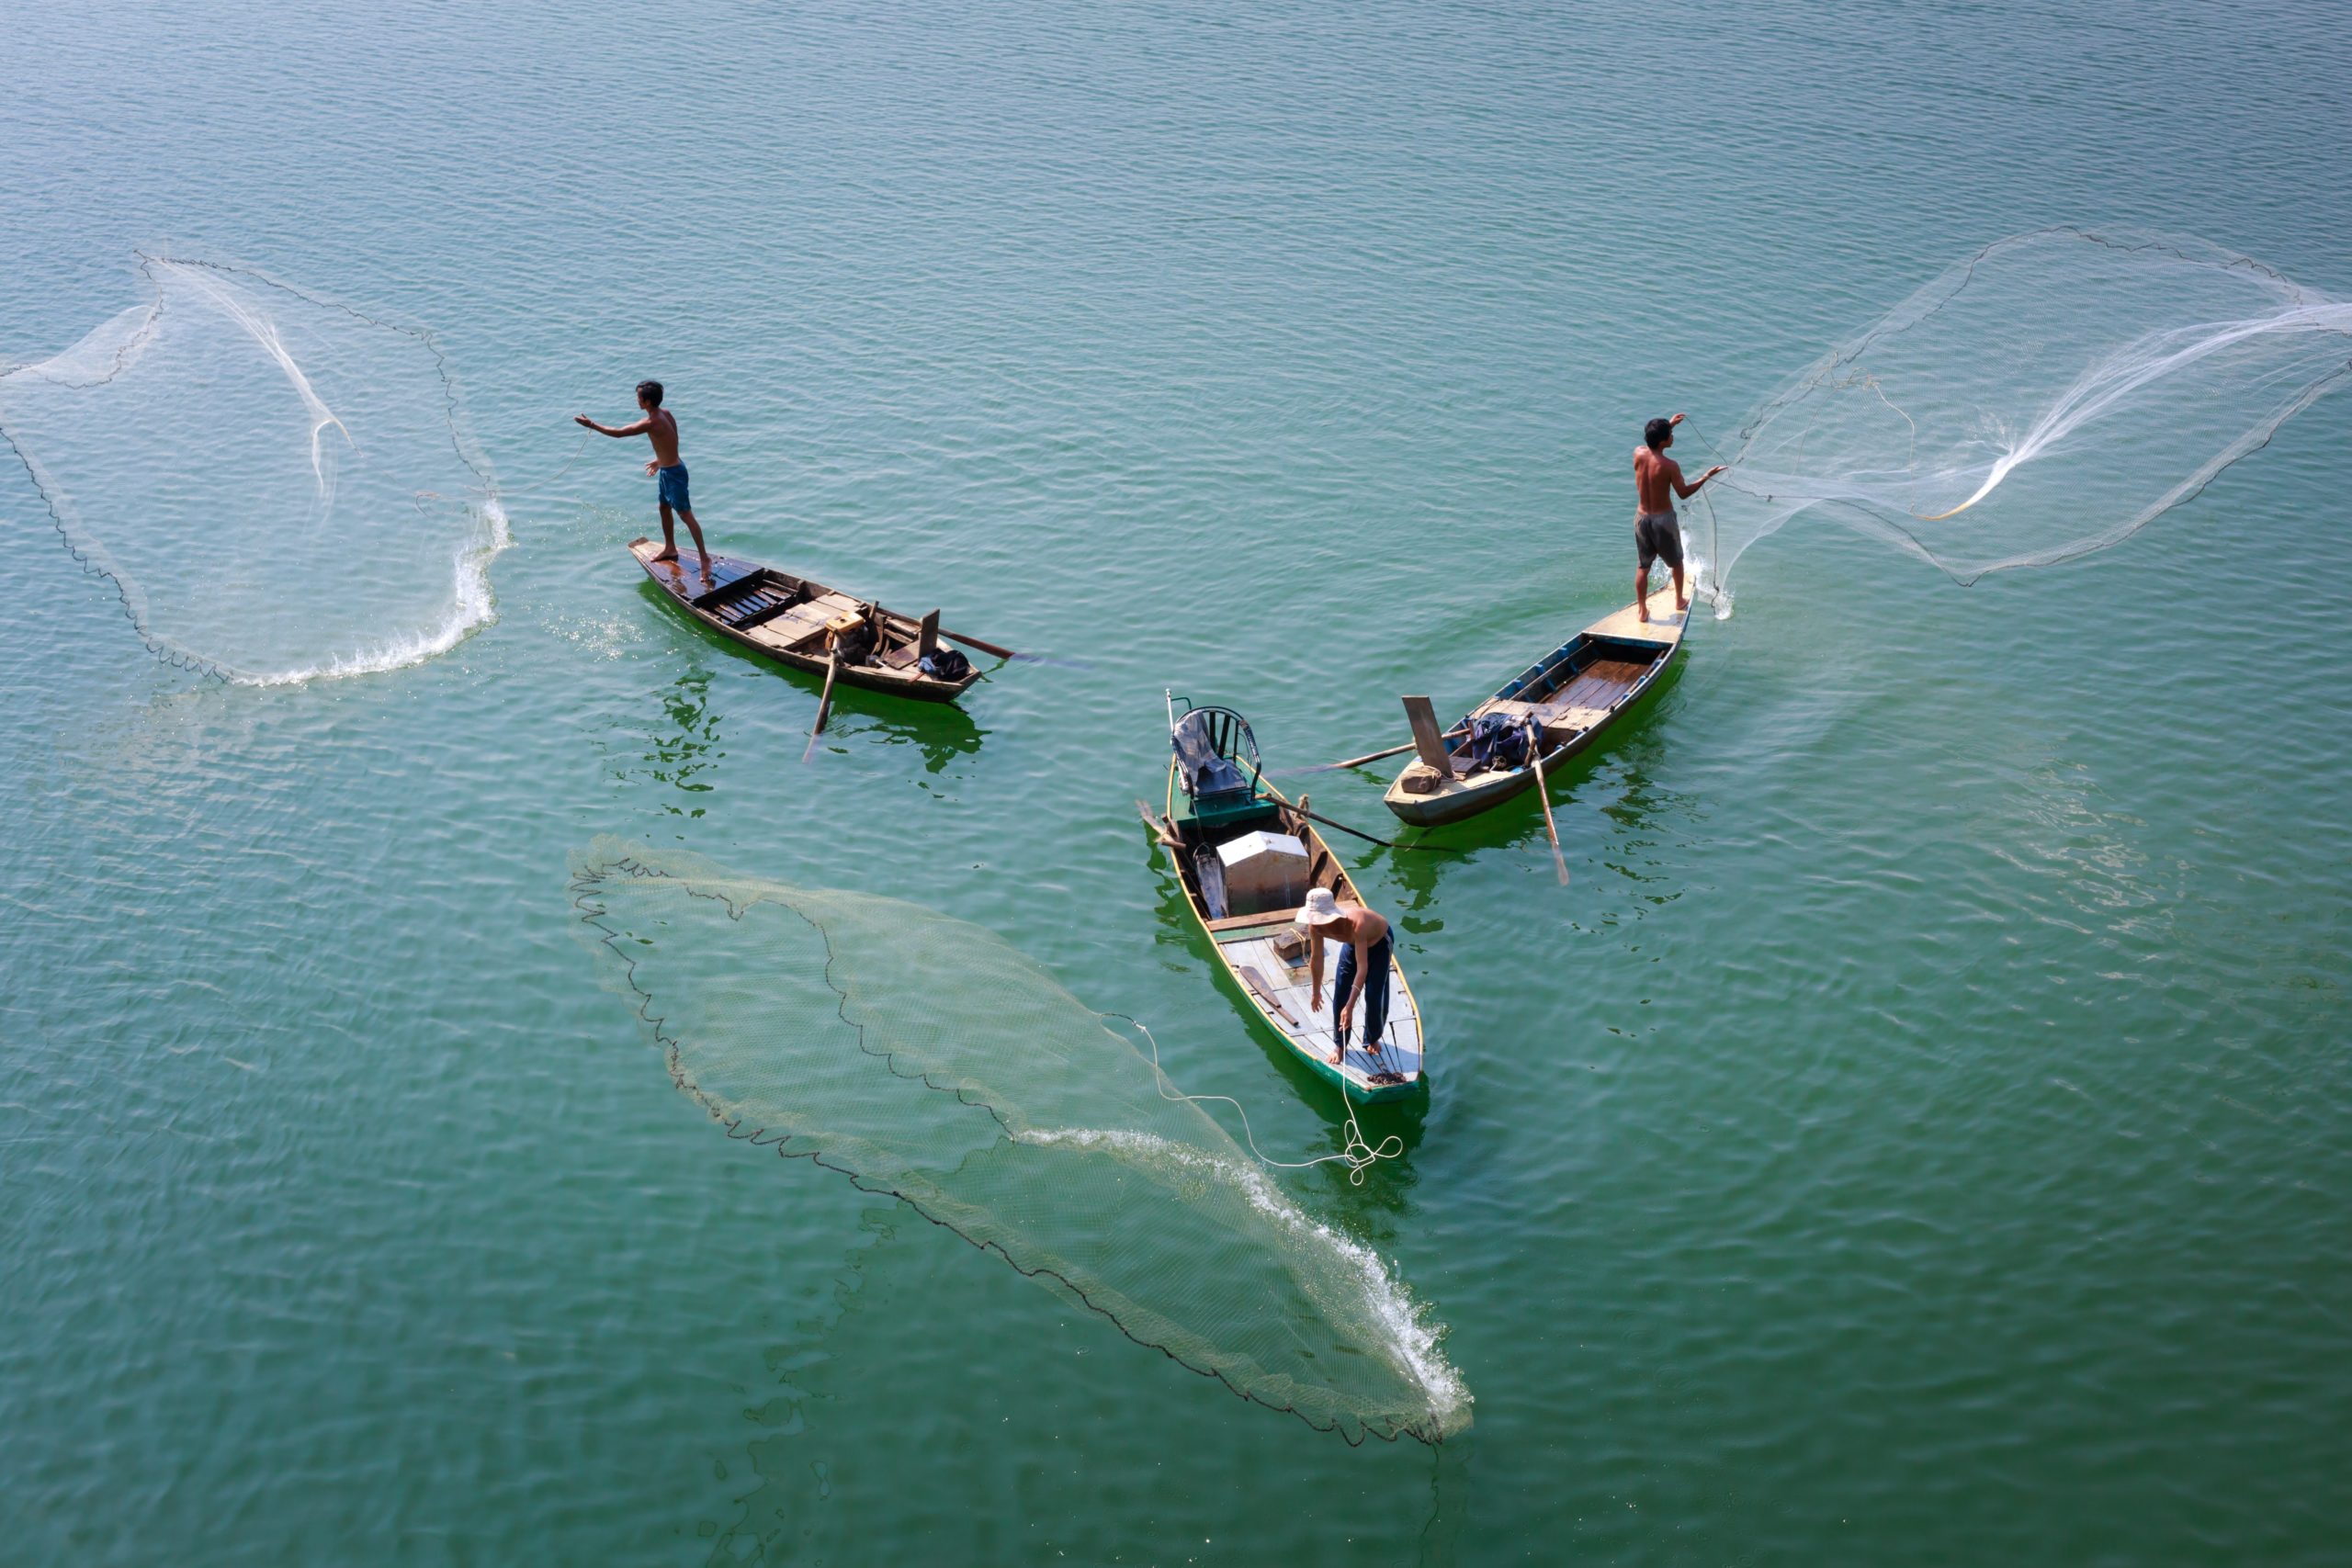 Three fishers casting nets off the side of their boats